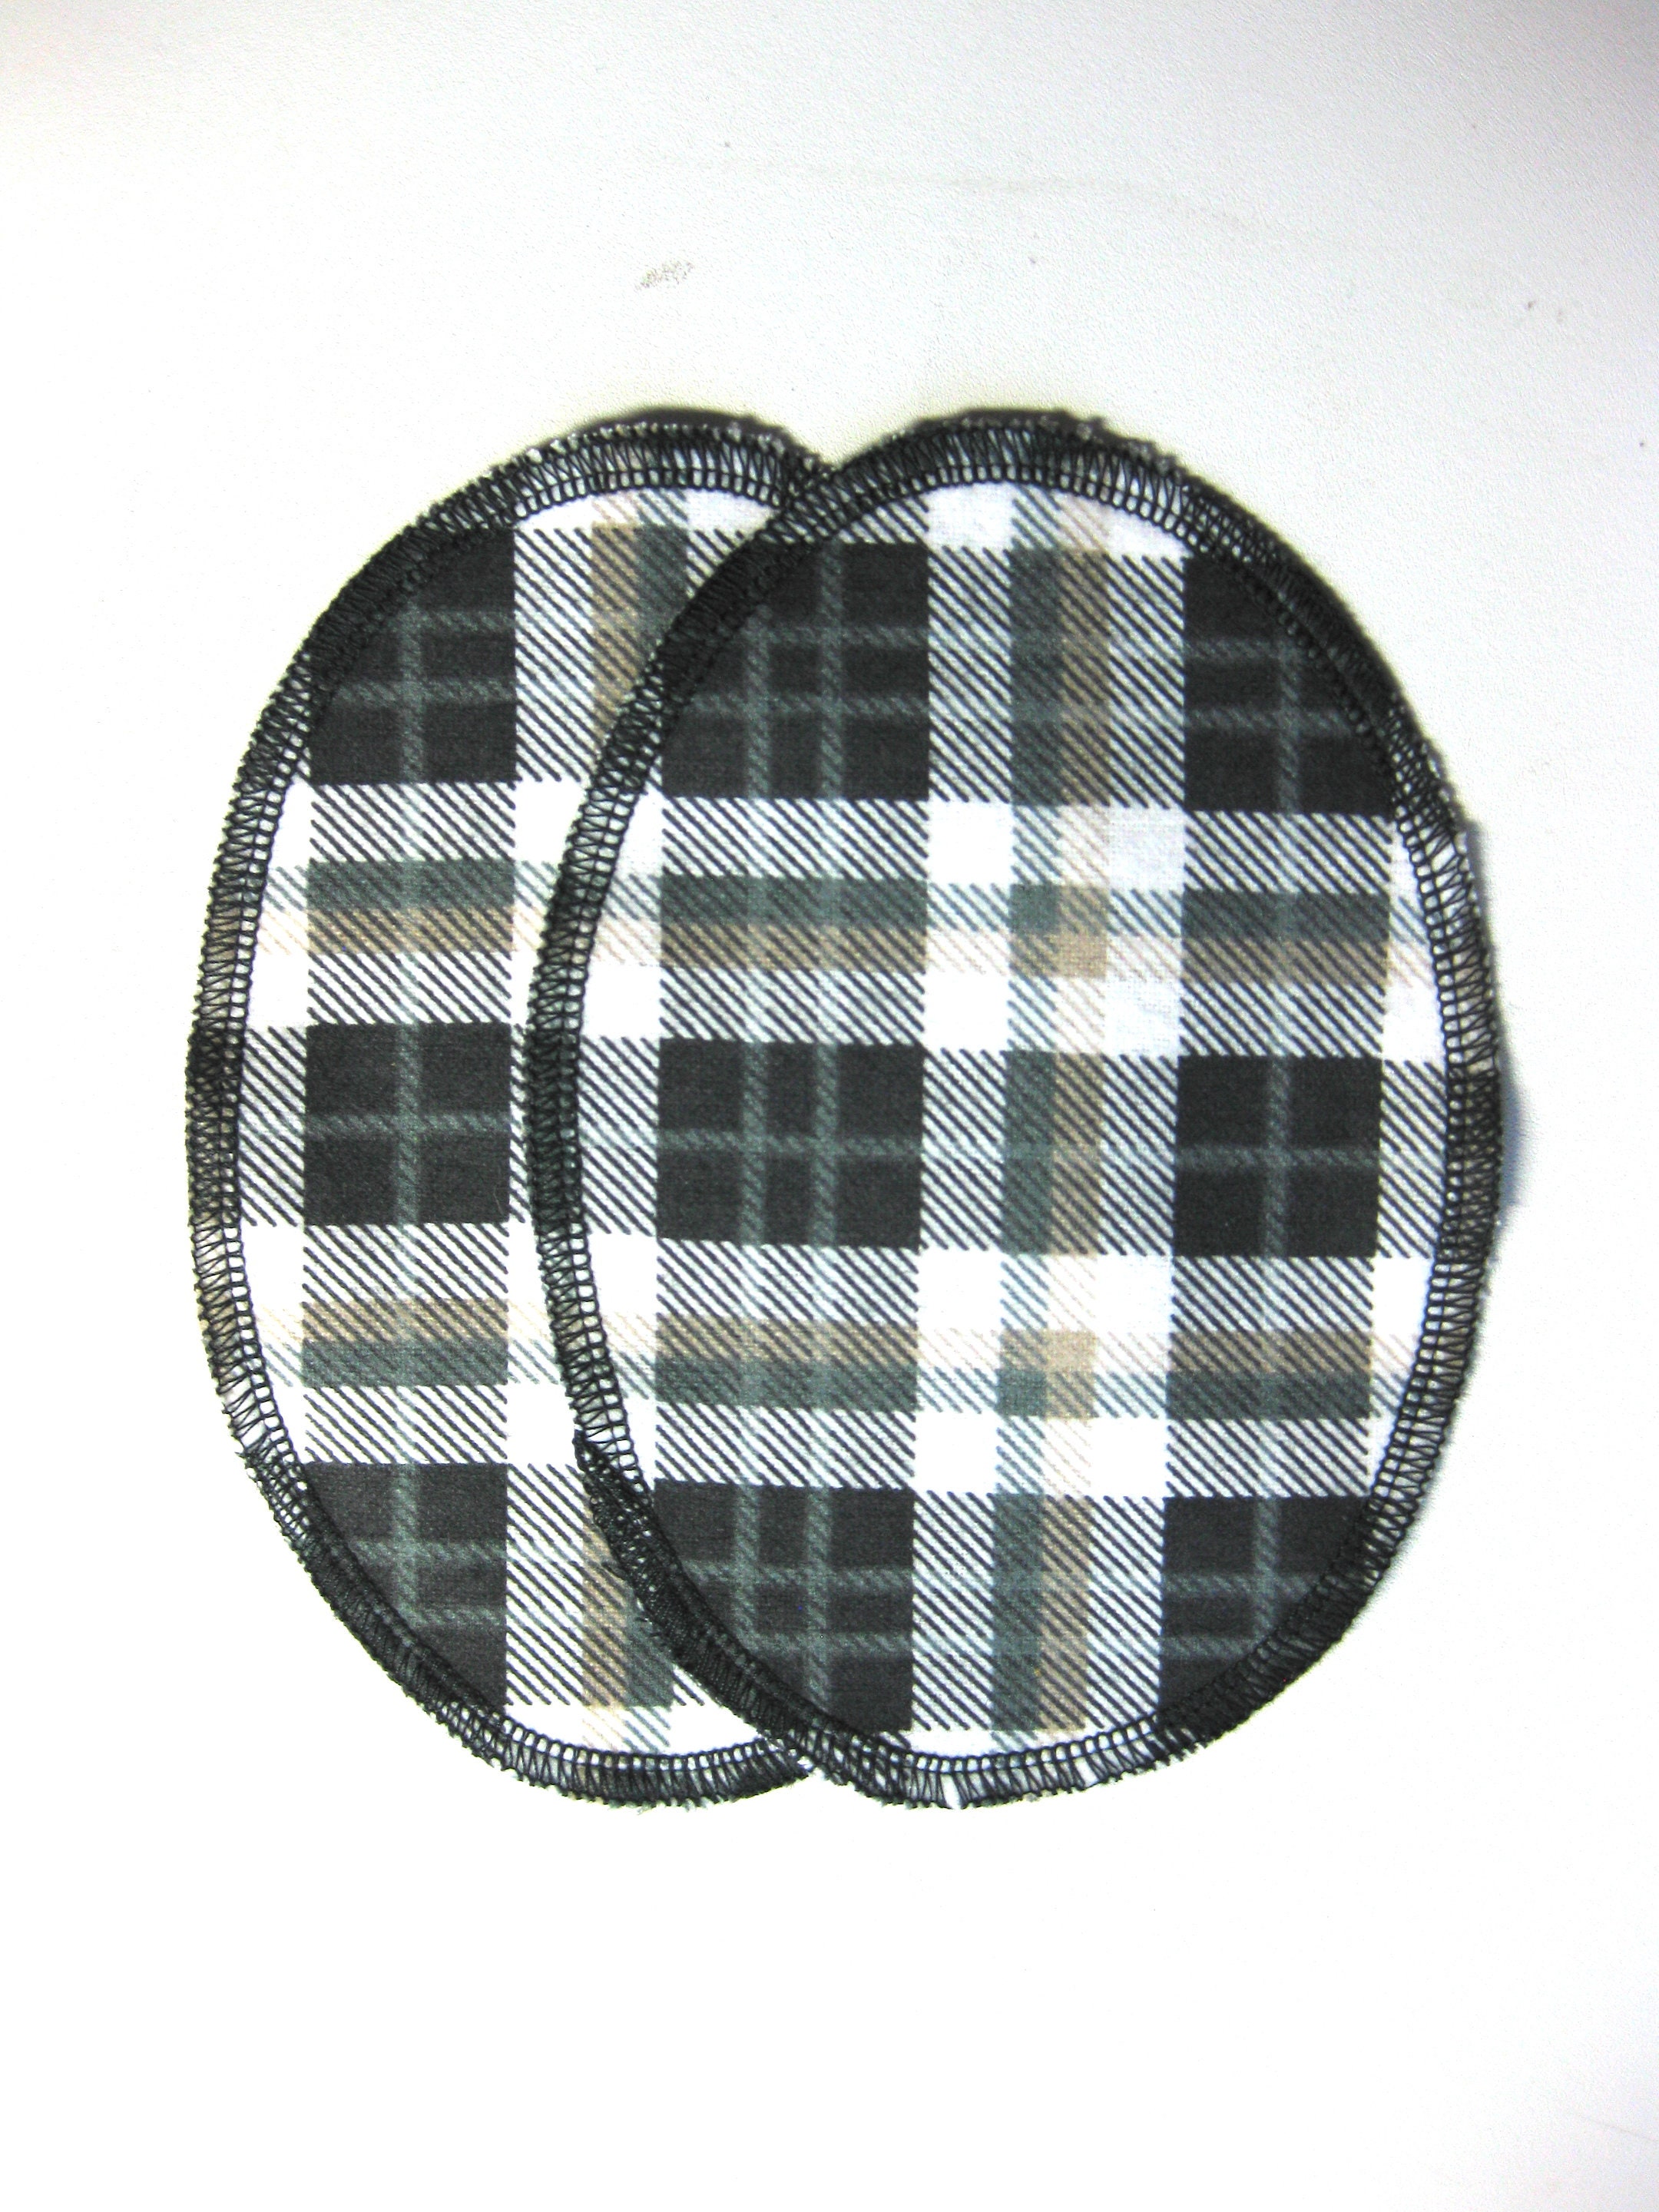 Iron on Patch Set, Knee & Elbow Patches for Kids Pants and Shirts, Red and  Black Buffalo Plaid Fabric, DIY Craft Kit 